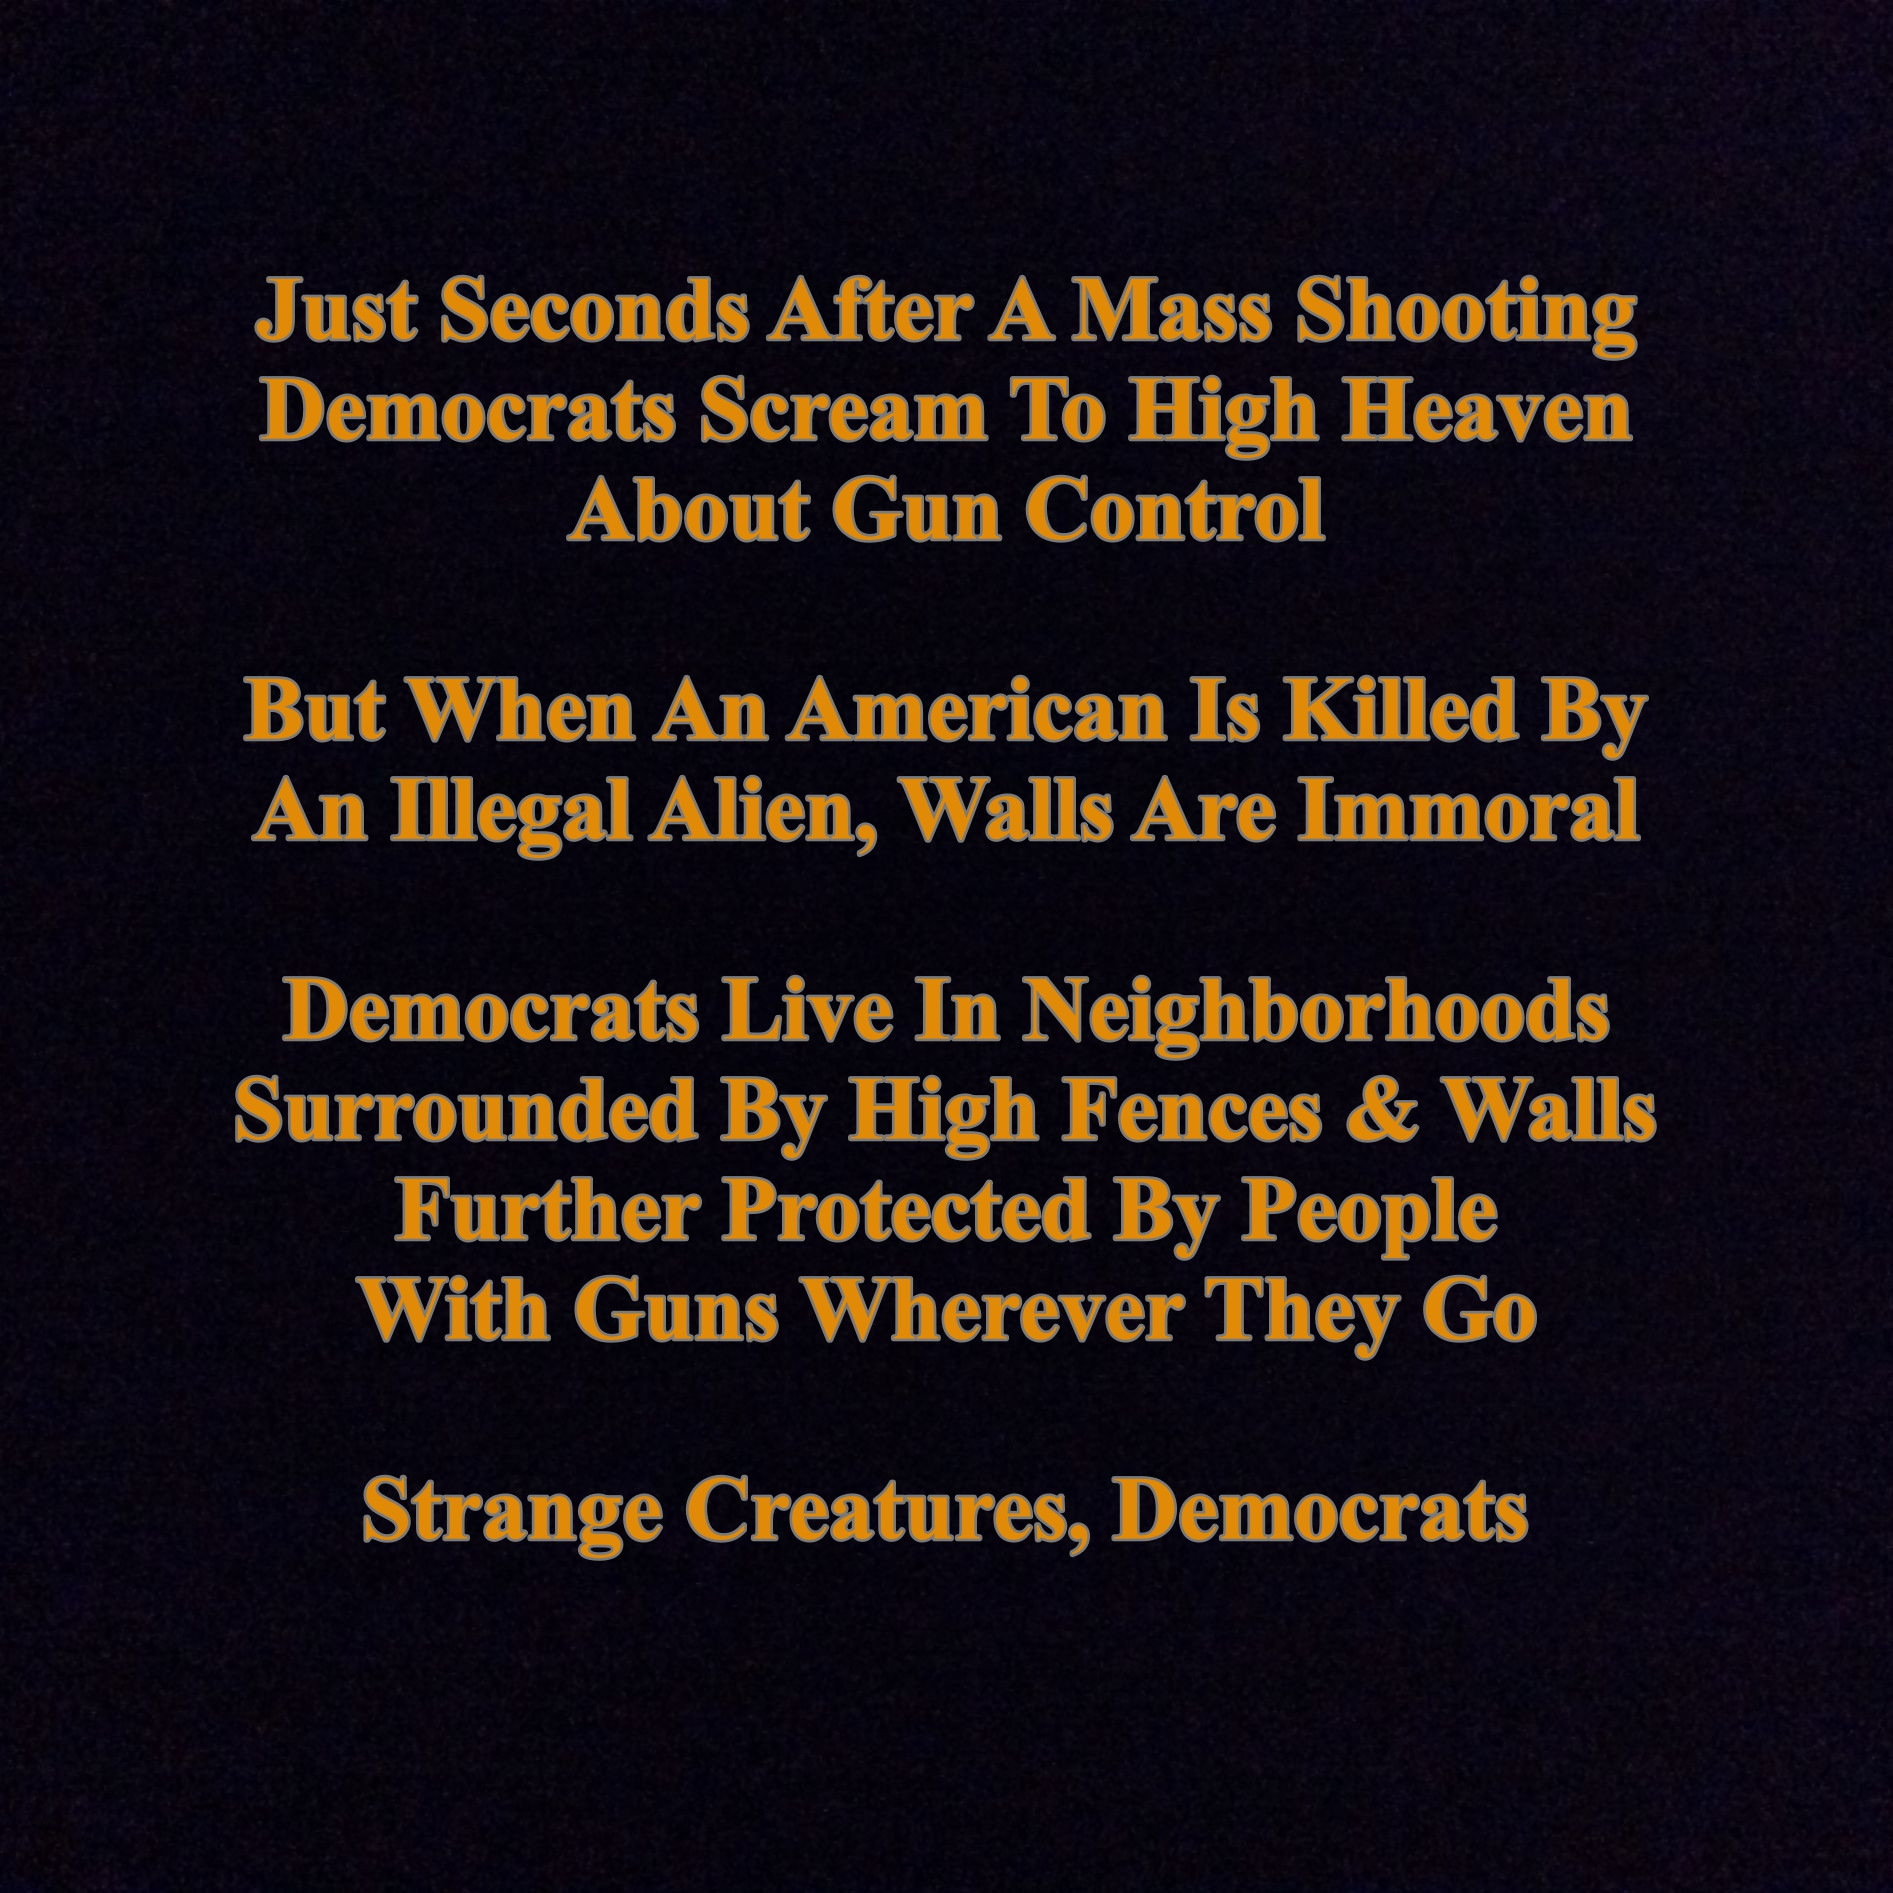 political meme atmosphere - Just Seconds After A Mass Shooting Democrats Scream To High Heaven About Gun Control But When An American Is Killed By An Ilegal Alien, Walls Are Immoral Democrats Live In Neighborhoods Surrounded By High Fences & Walls Further